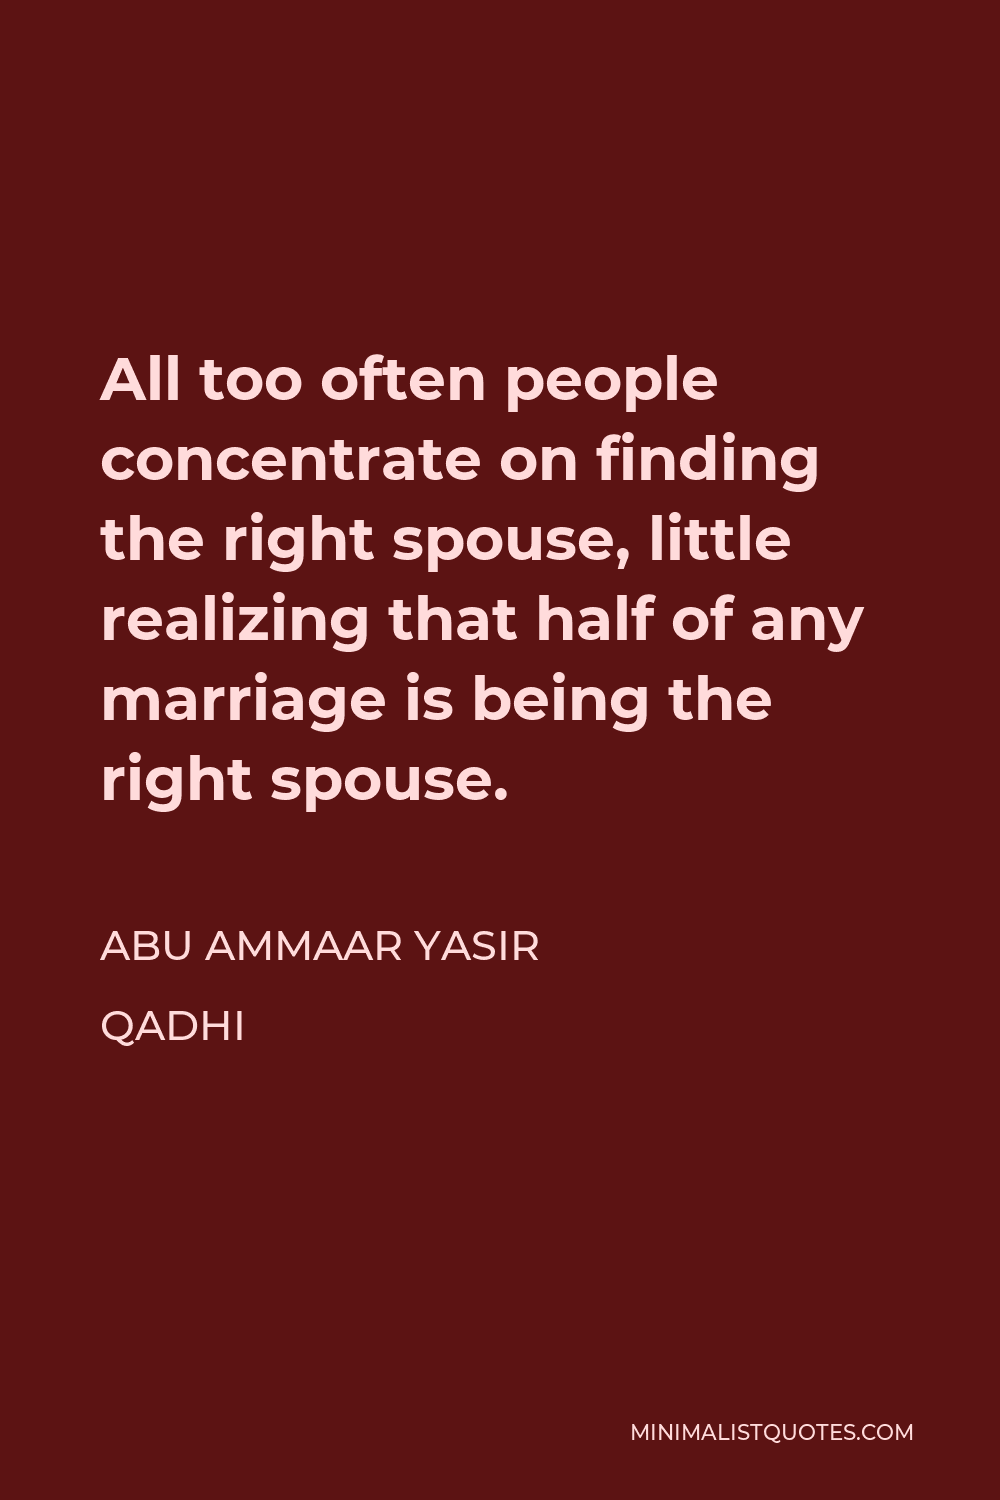 Abu Ammaar Yasir Qadhi Quote - All too often people concentrate on finding the right spouse, little realizing that half of any marriage is being the right spouse.